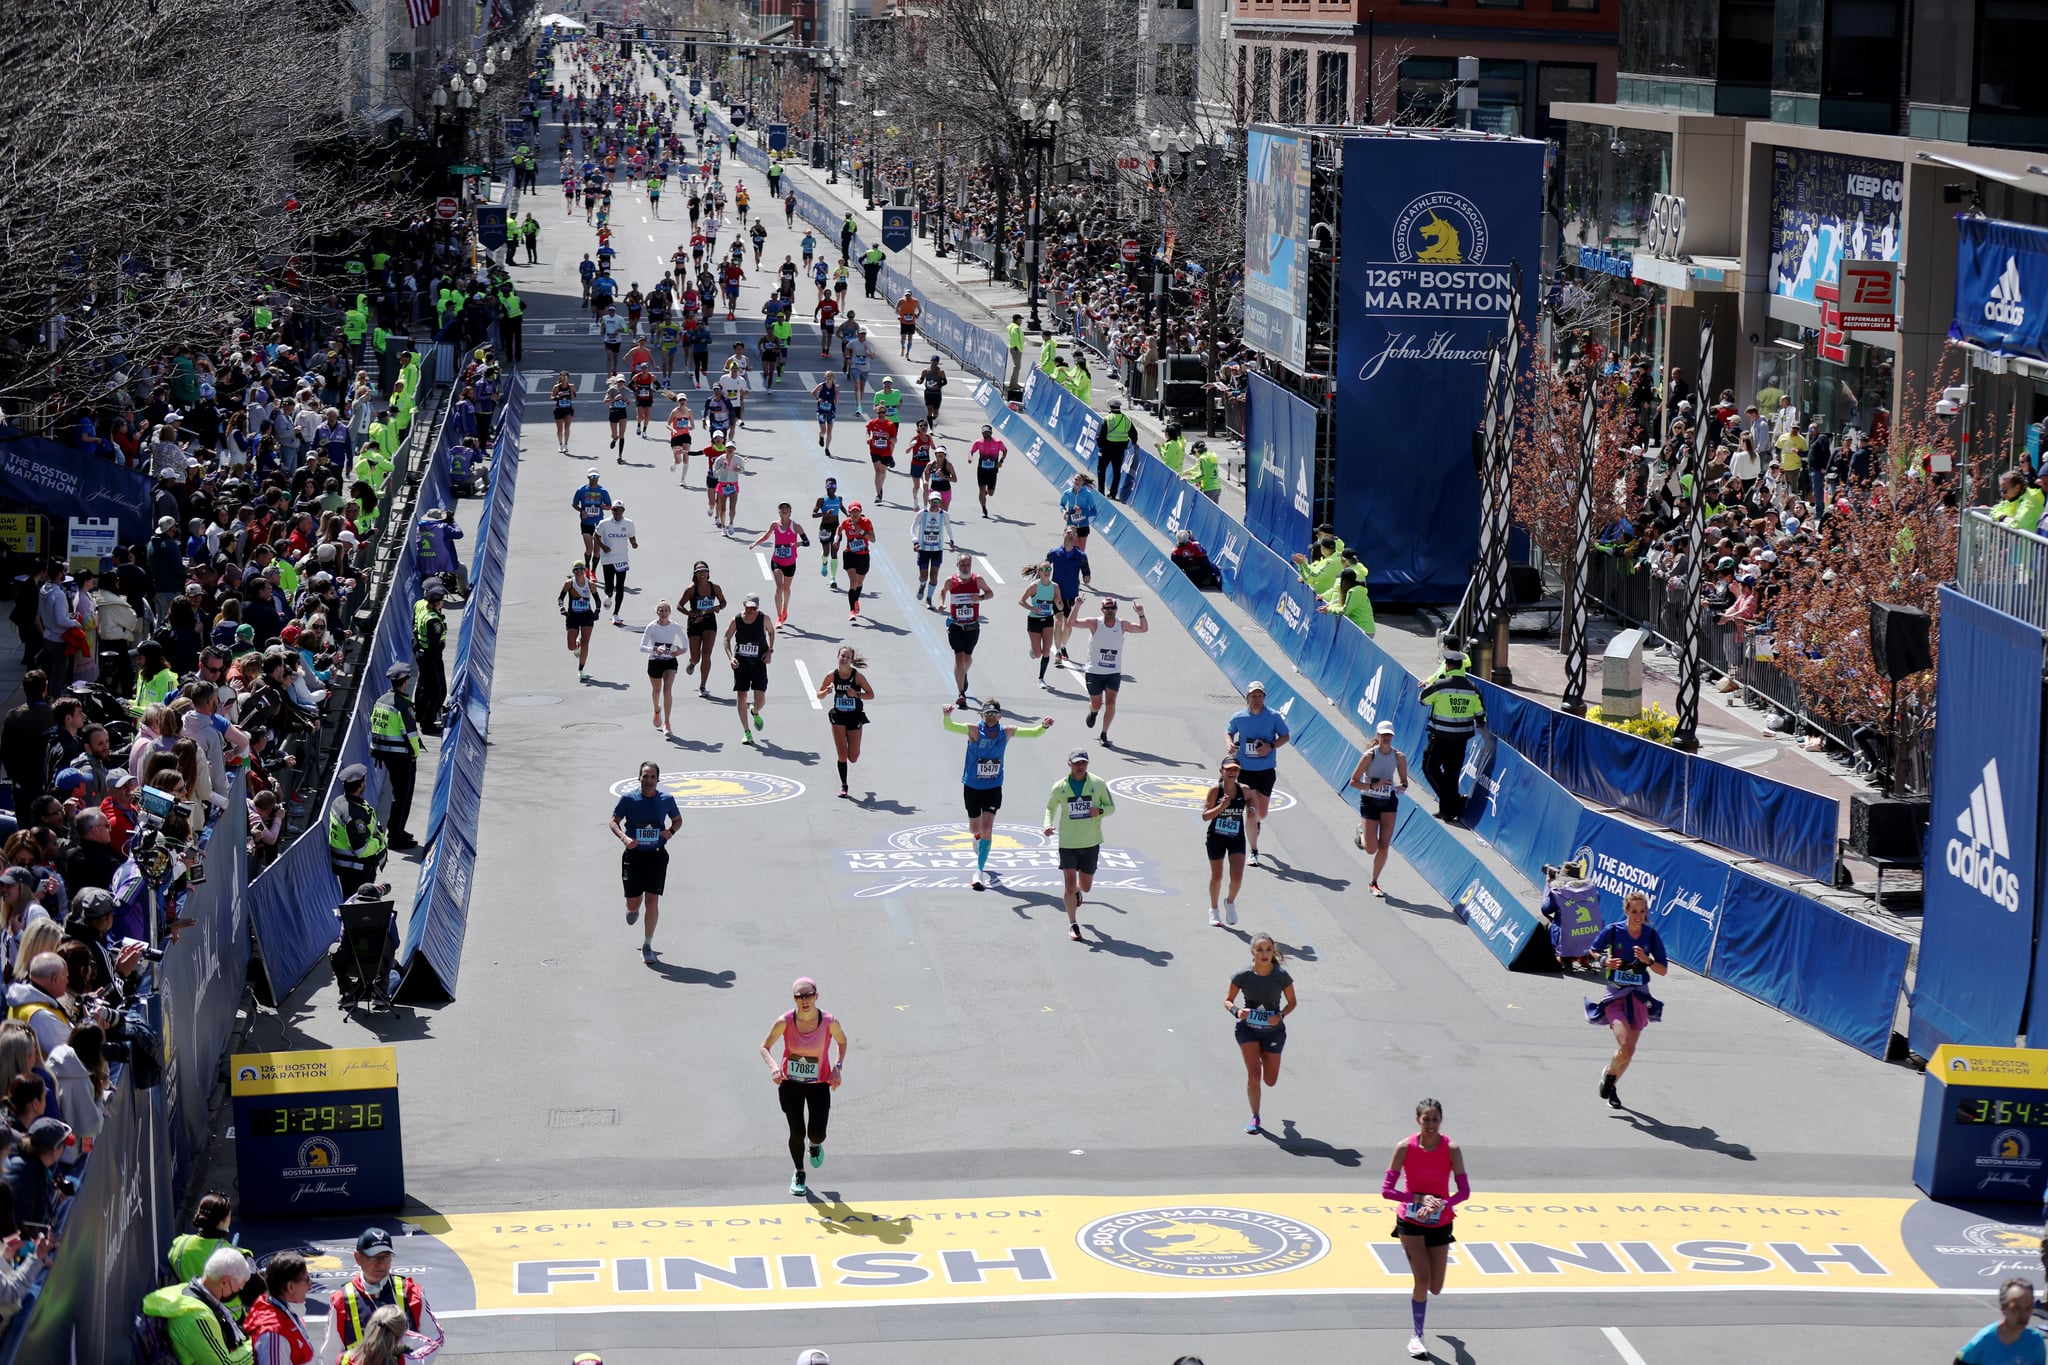 BOSTON, MASSACHUSETTS - APRIL 18: Runnings make their way down Boylston street to the finish line during the 126th Boston Marathon on April 18, 2022 in Boston, Massachusetts. (Photo by Omar Rawlings/Getty Images)